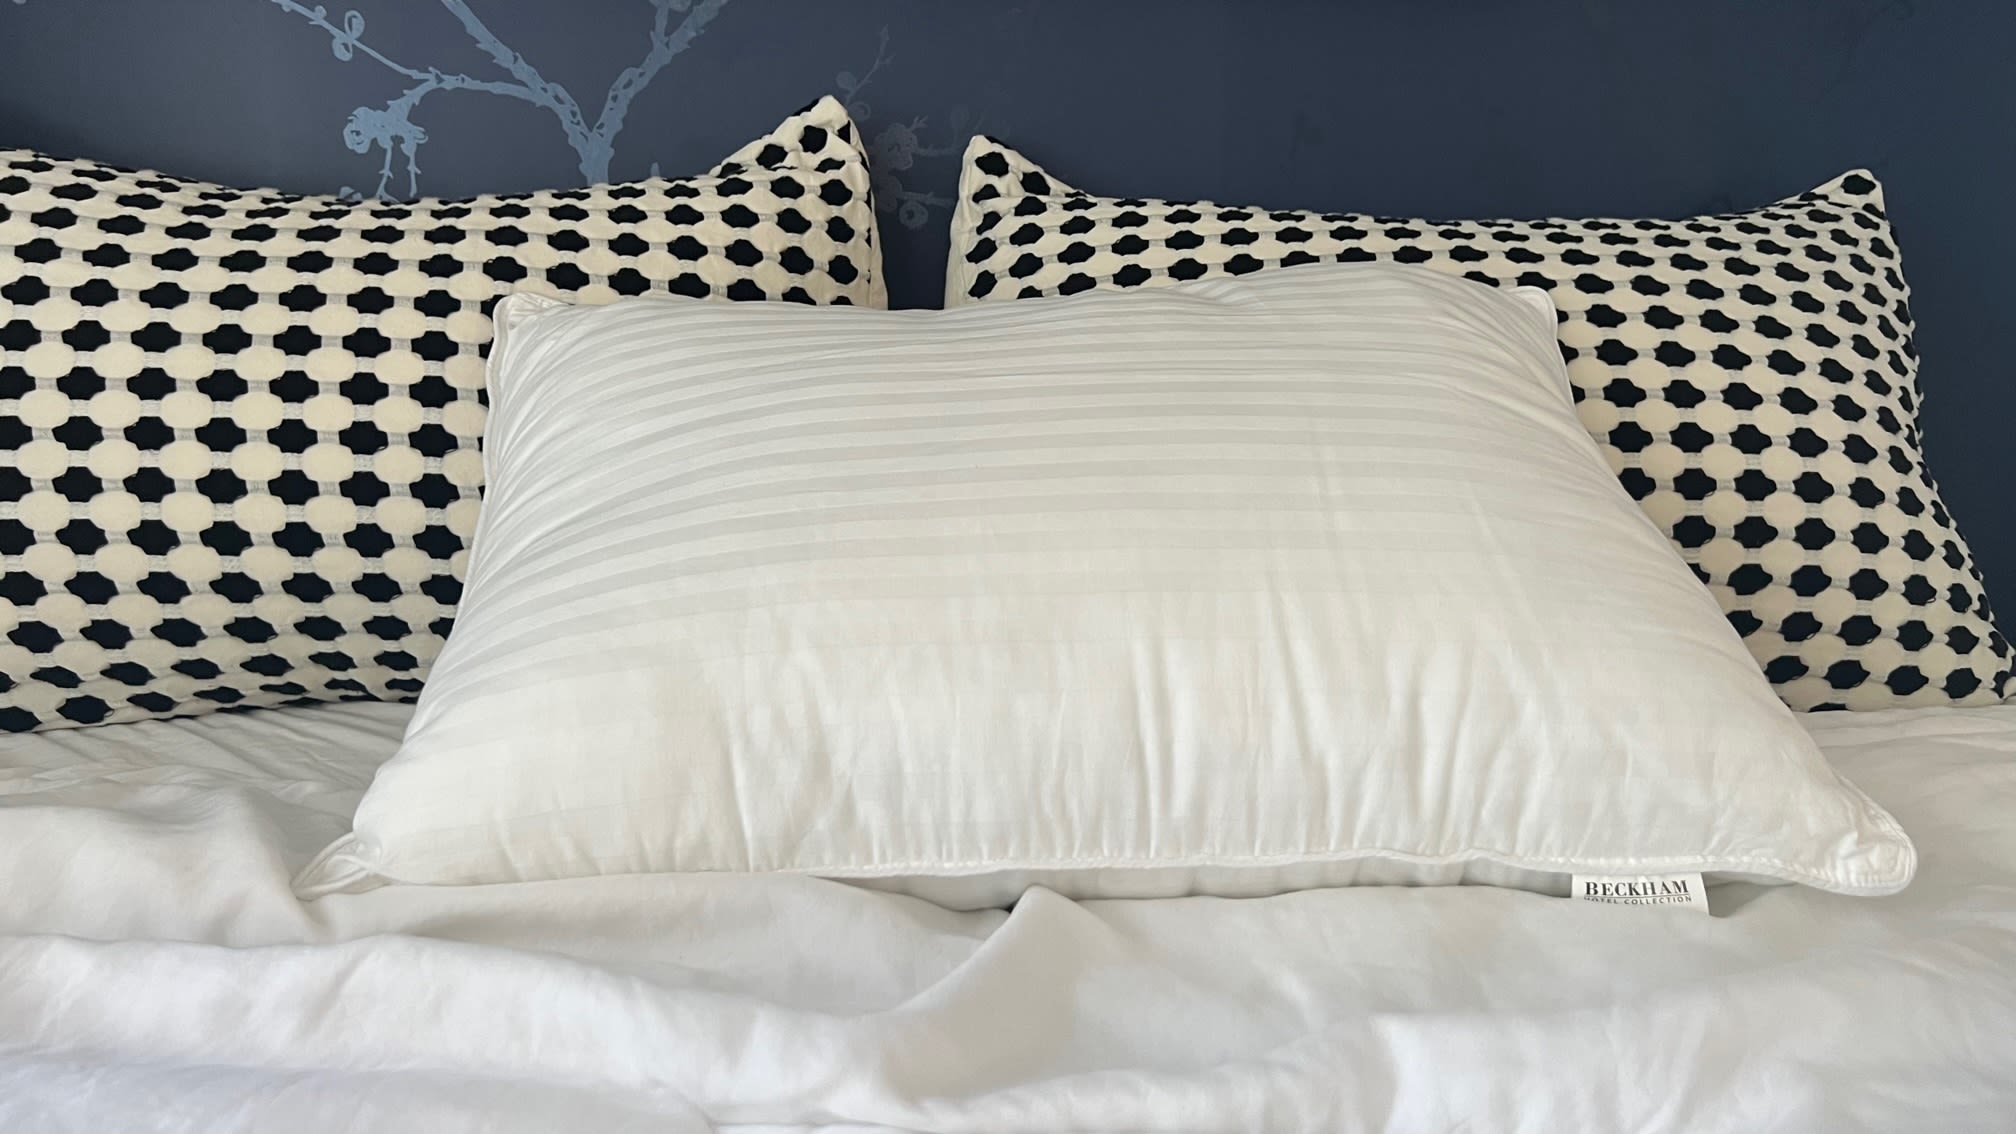 Best Pillows for Back Sleepers of 2023